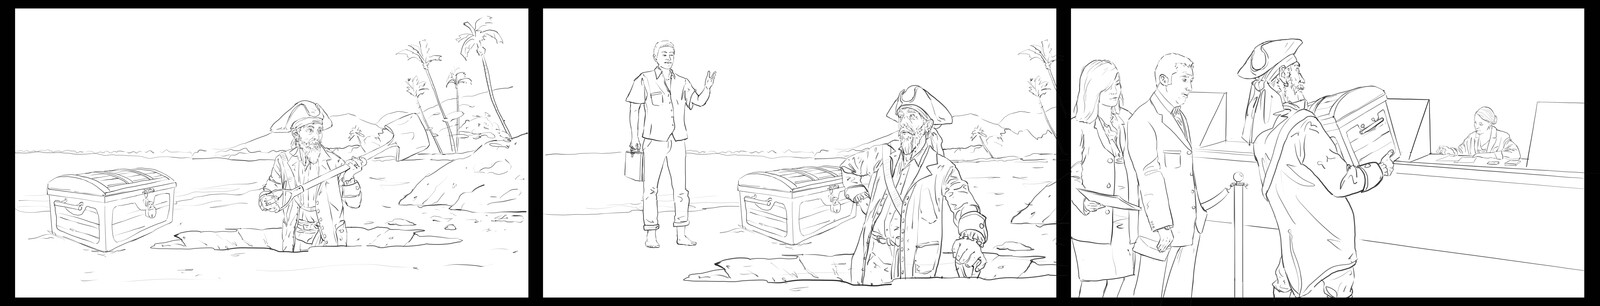 Various storyboard sequences done for ads